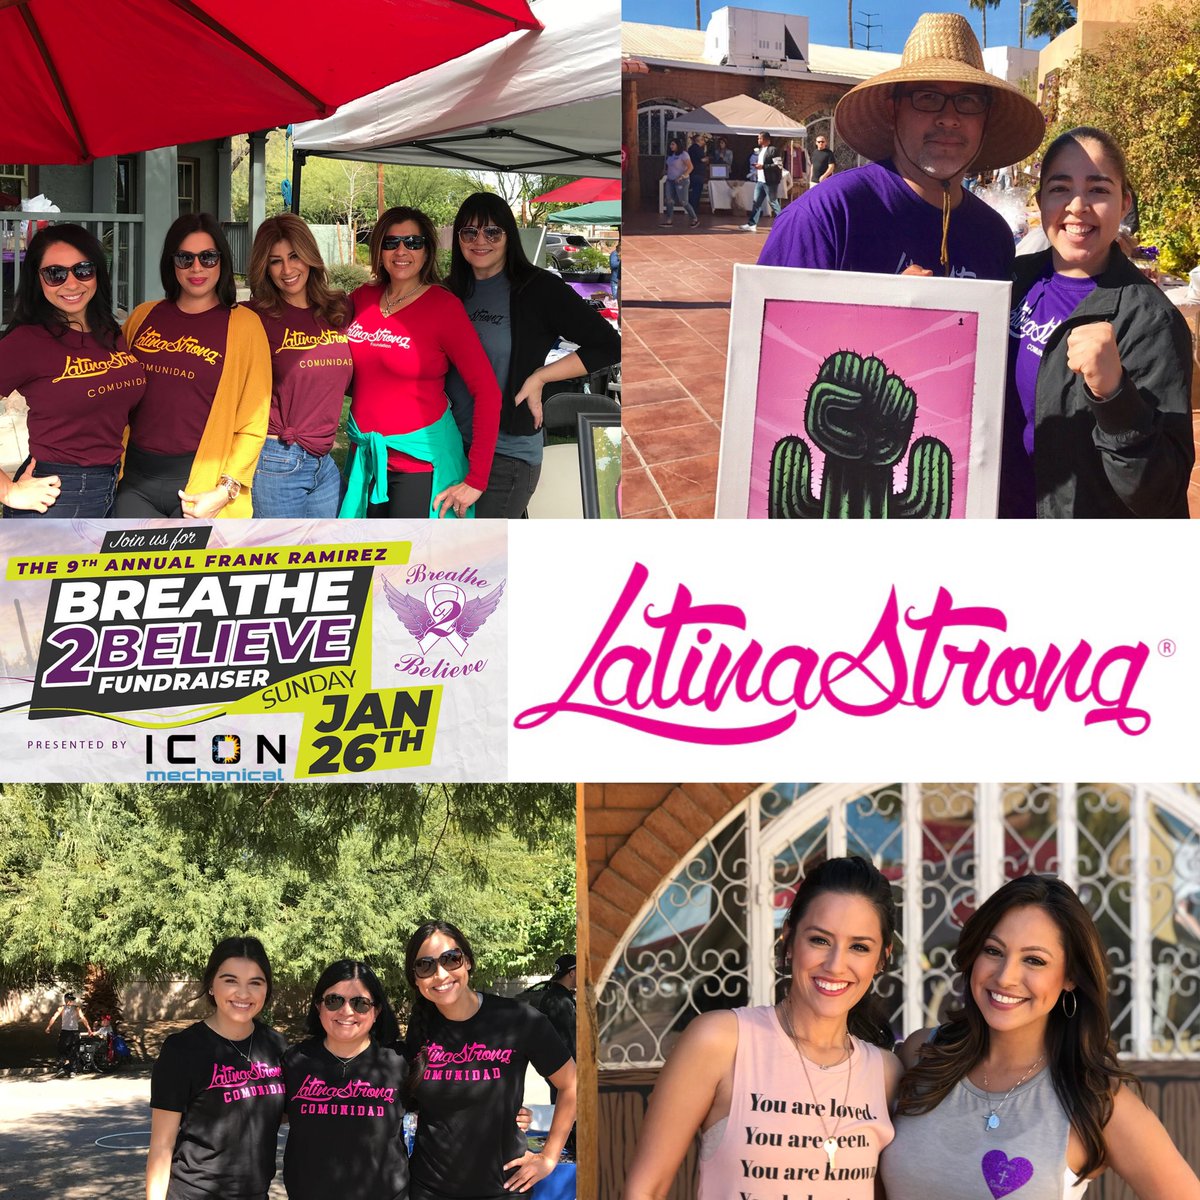 Join us this Sunday
@CancerSupportHQ as we support LatinaStrong®️ member @VanessaROnAir & the 9th Annual Breathe 2 Believe fundraiser in memory of her father, Frank Ramirez. 

#LatinaStrong #LatinoHealthAz  #Educate #Empower #SDoH  #CancerFreeAz  #Breathe2Believe

 @12newsaz